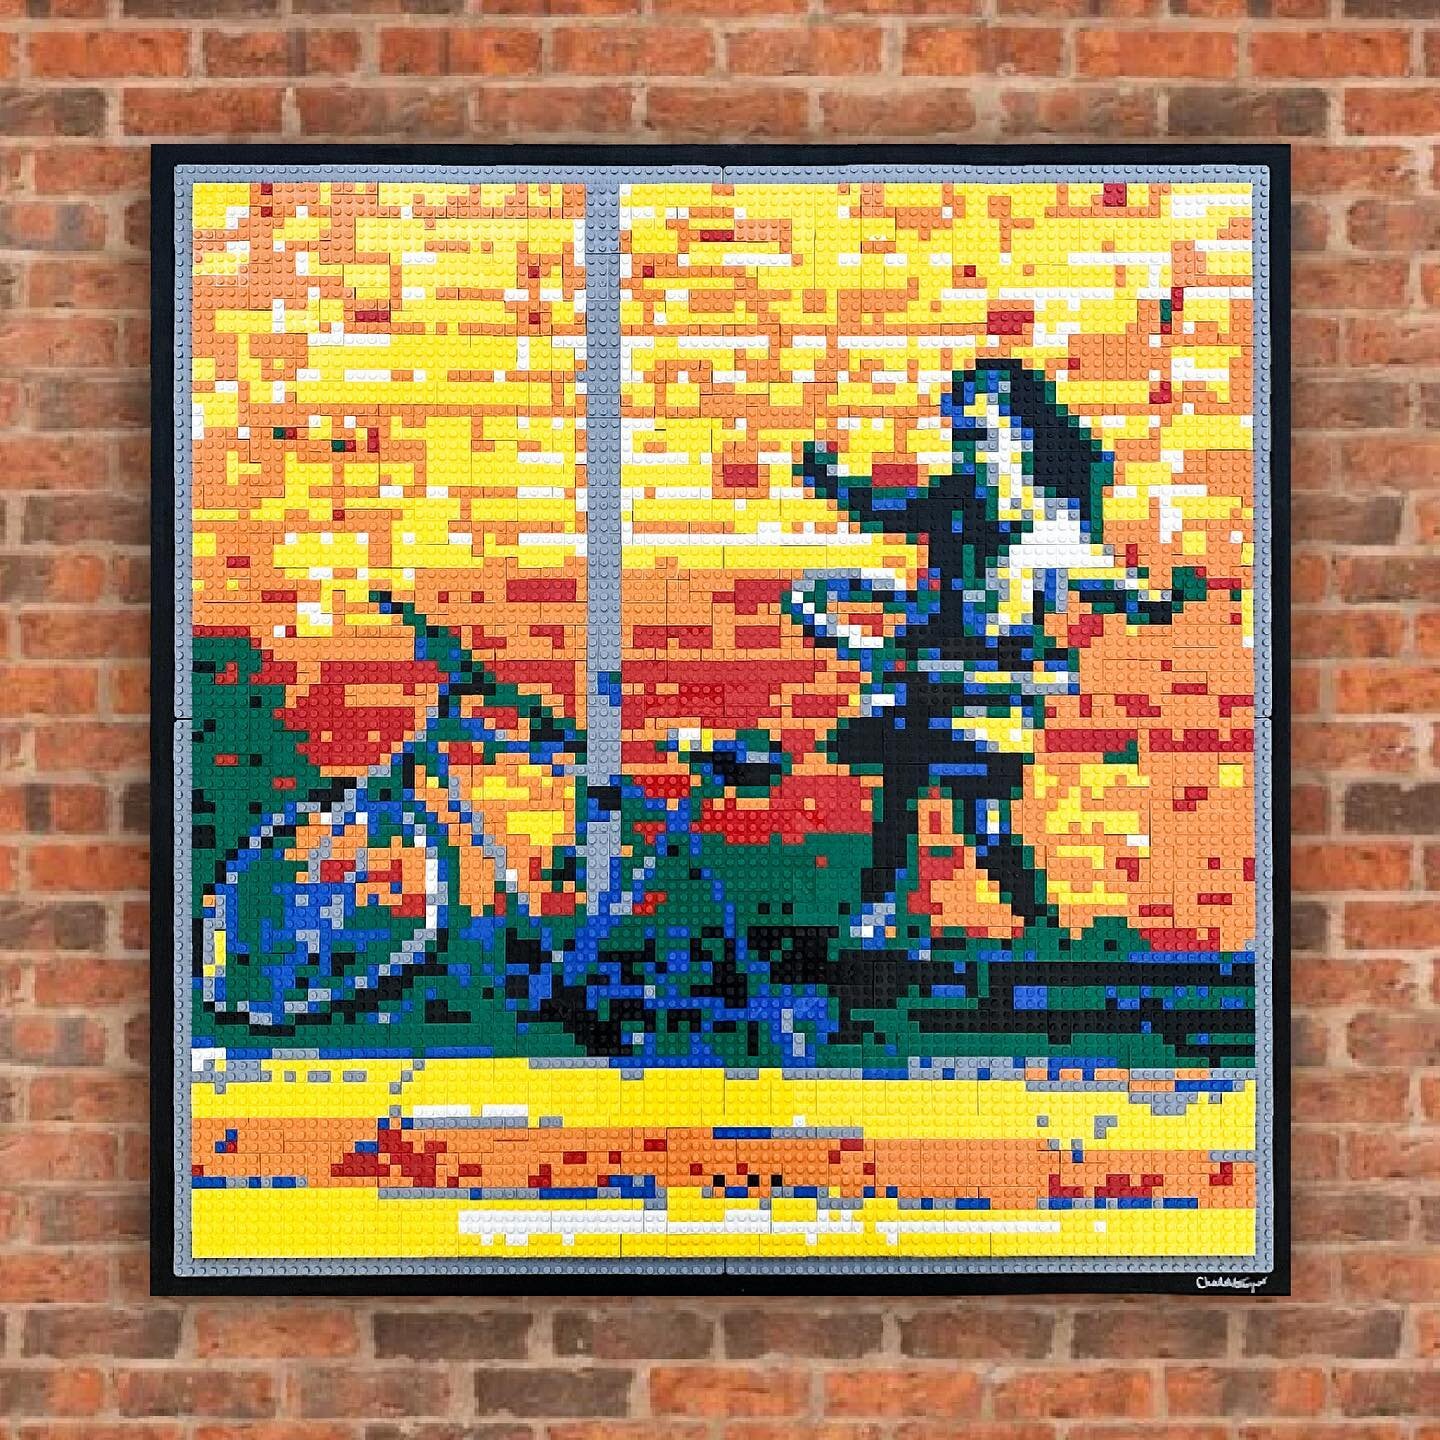 I still can&rsquo;t believe Banksy came to nottingham.
Here is my LEGO tribute to the 
hula girl. 
Swipe ➡️ to see process. 

@banksy you&rsquo;re always welcome back if you fancy creating another one 😜✌🏼

#banksy #banksyart #banksyartwork #legoart